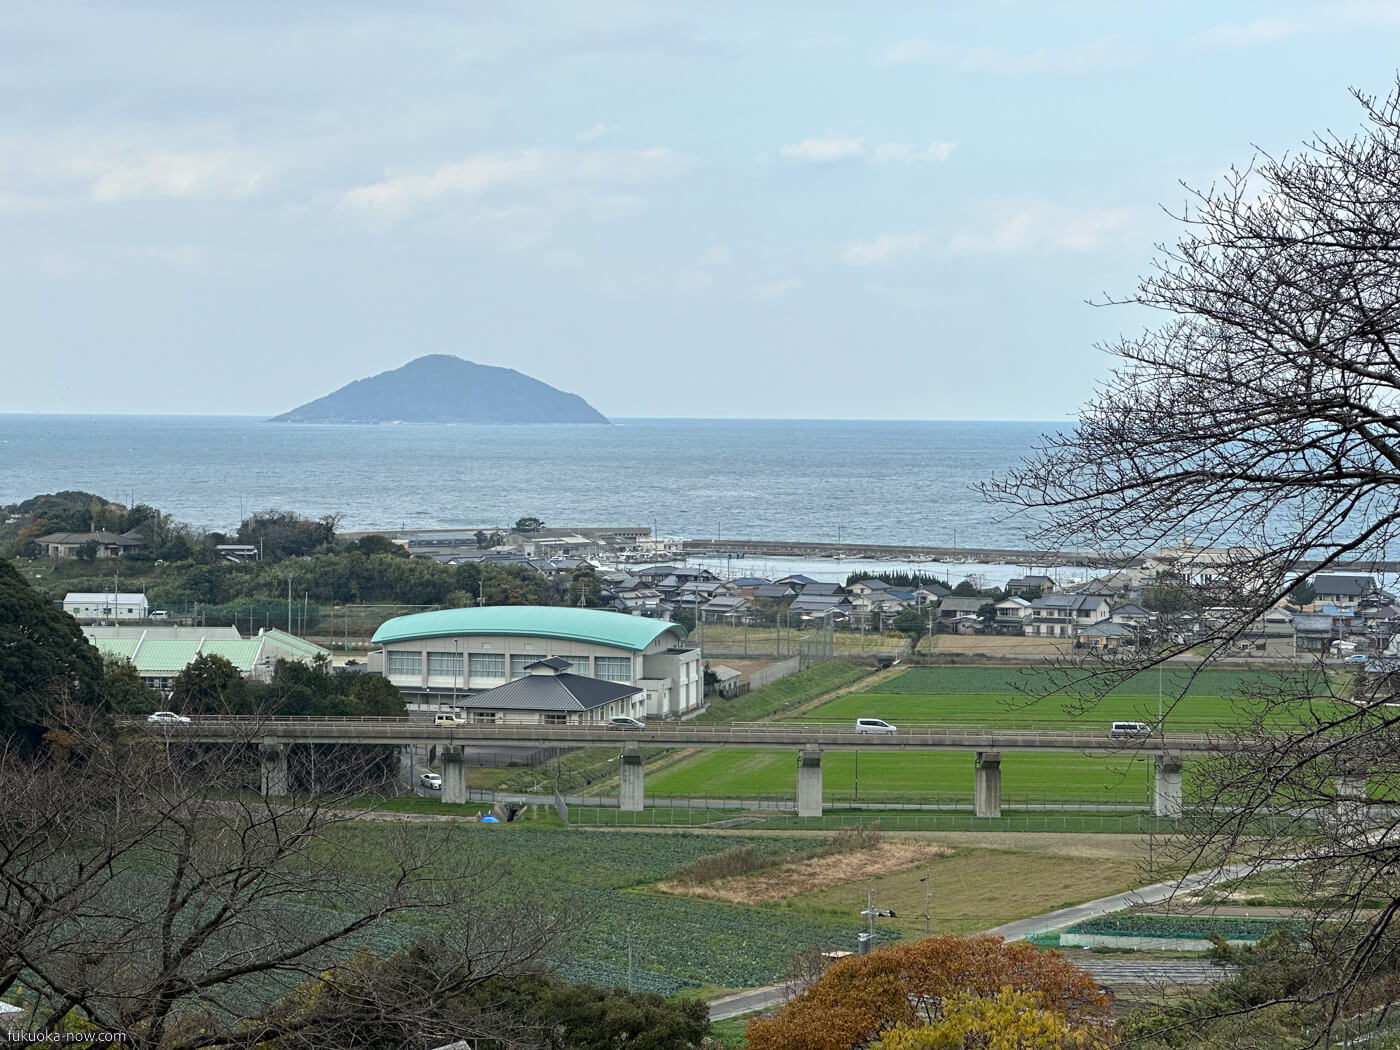 Itoshima on Foot: Enjoy the ocean, mountains, farmland and beaches at a leisurely pace, 海も山も田畑もビーチも！歩いて楽しむ糸島